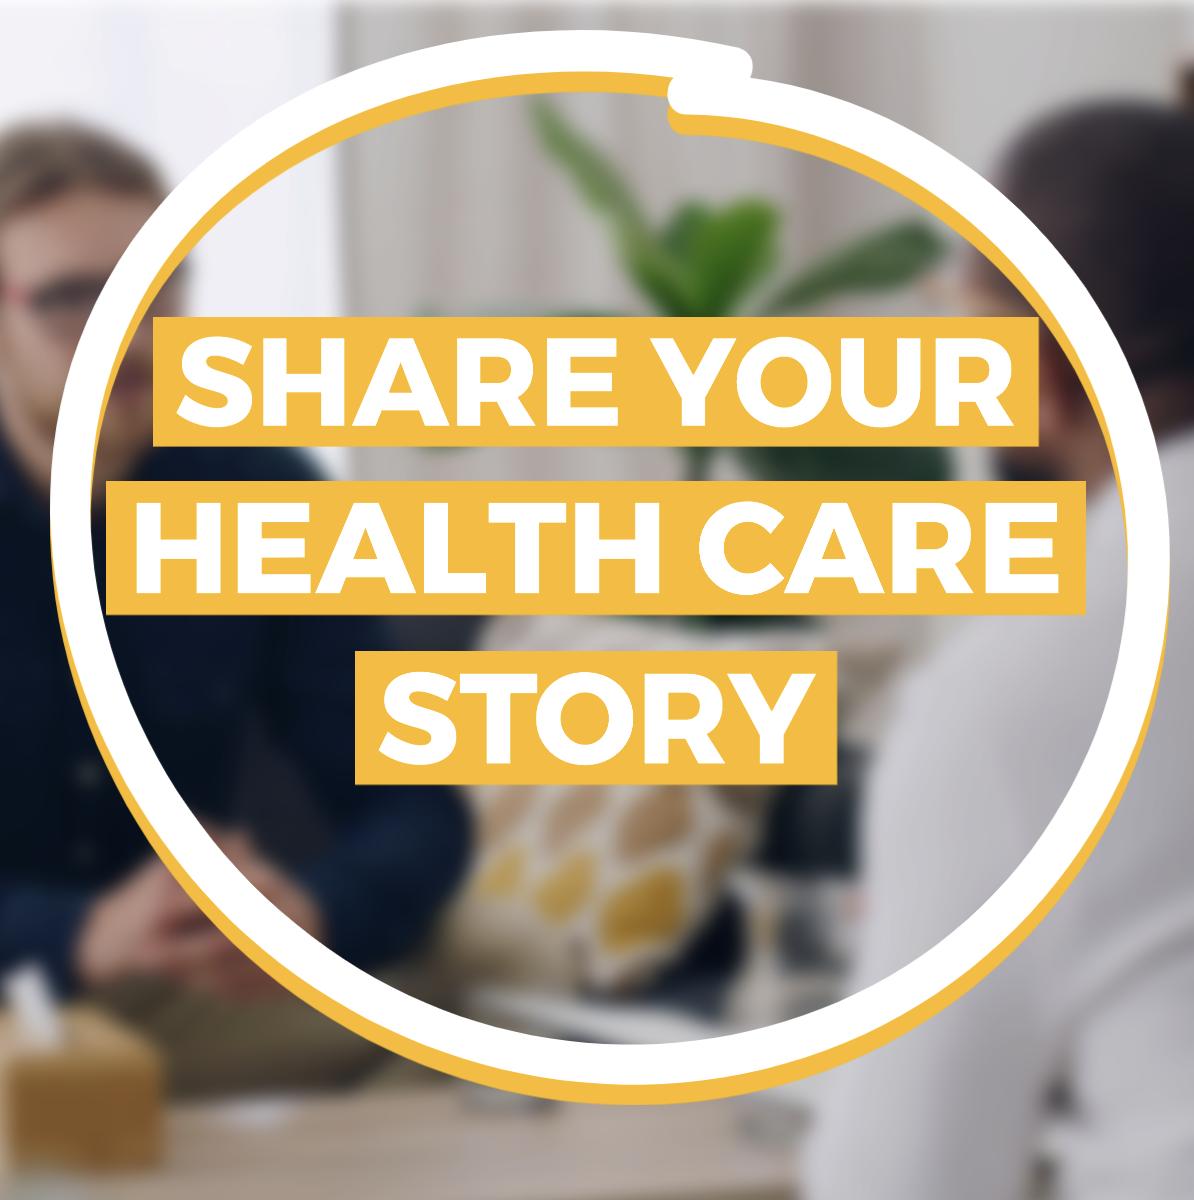 Share your health care story